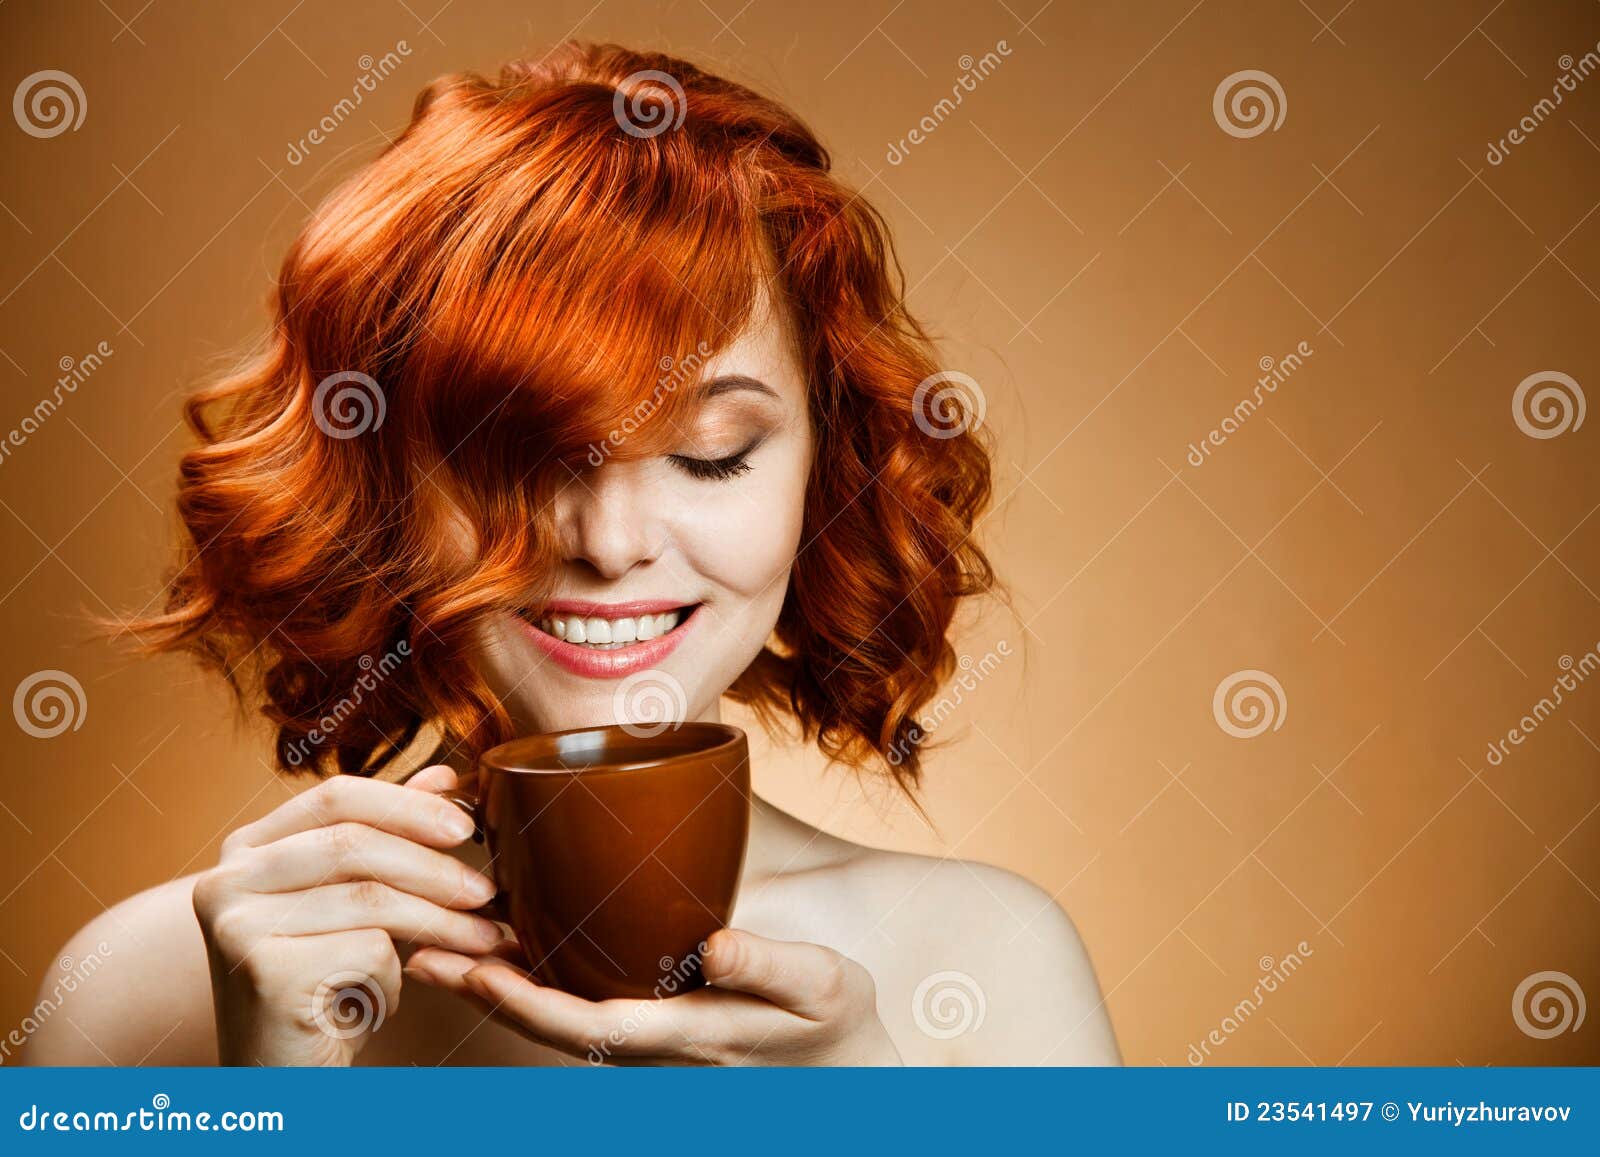 woman with an aromatic coffee in hands